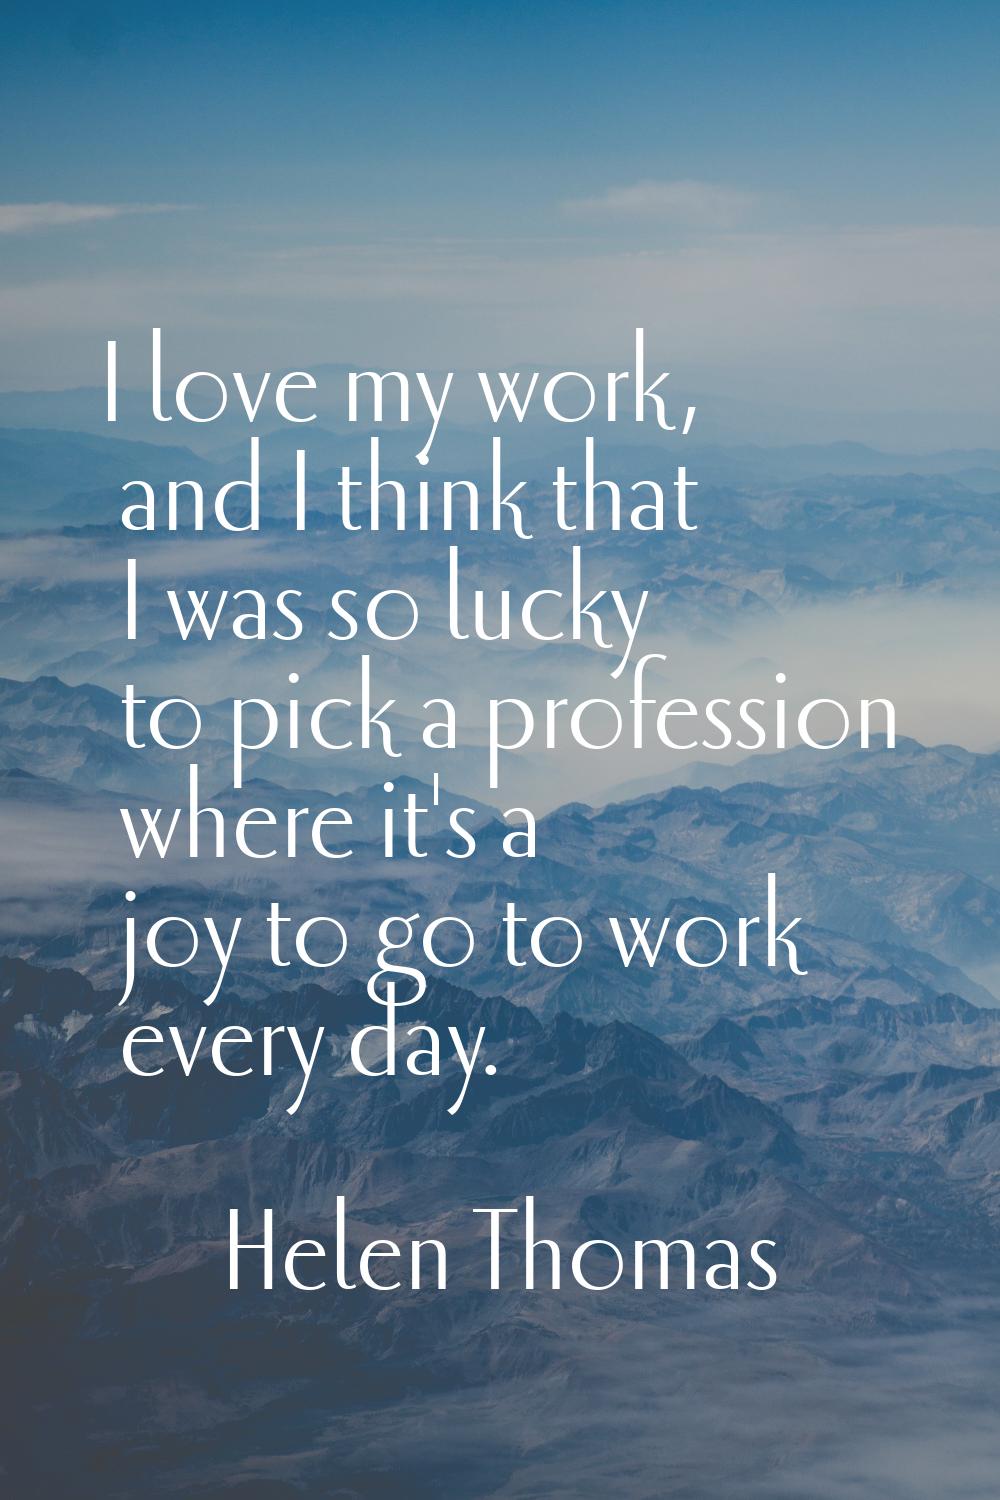 I love my work, and I think that I was so lucky to pick a profession where it's a joy to go to work